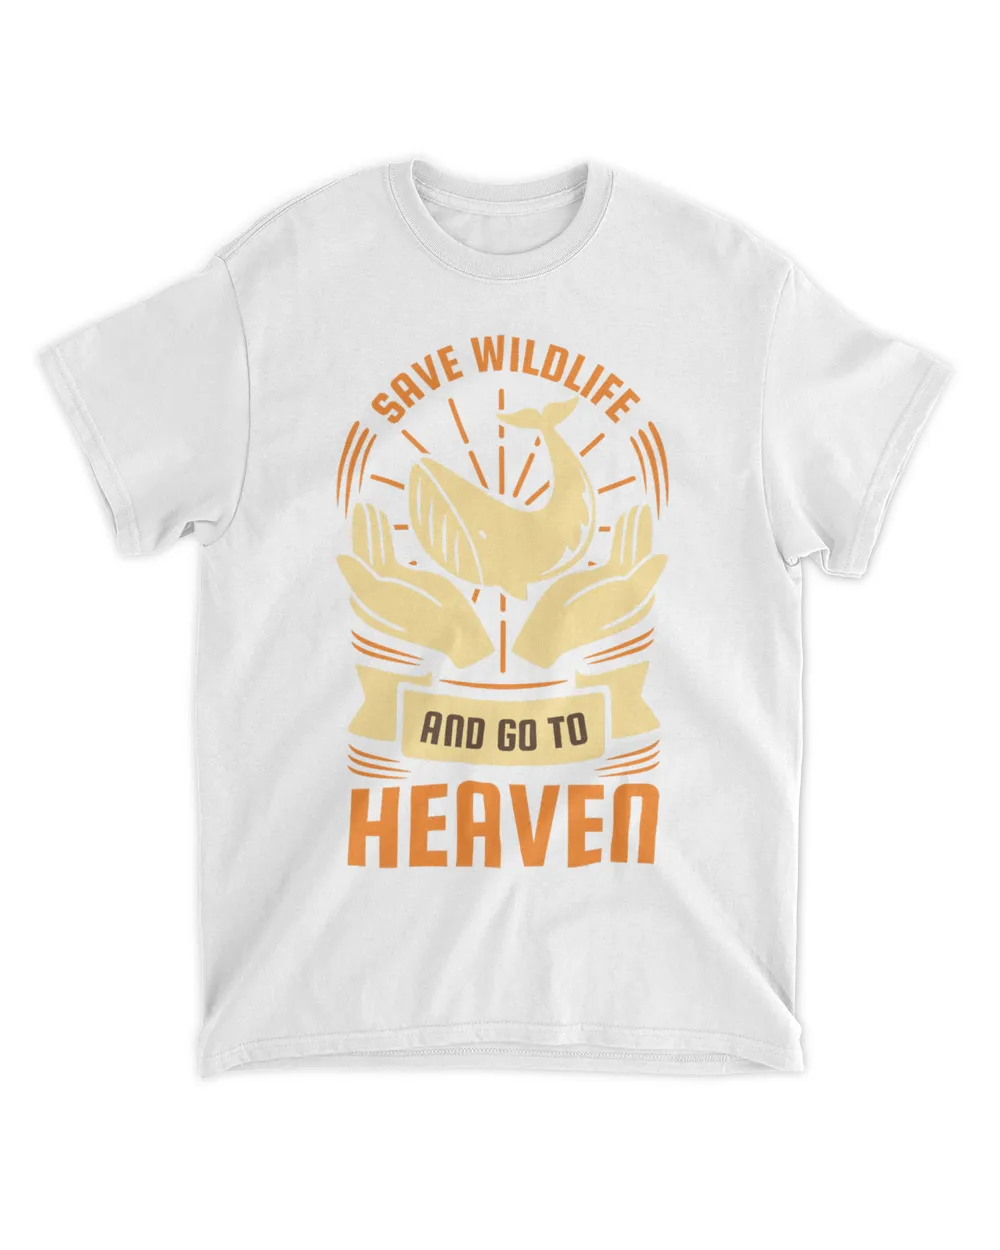 Safe Wildlife And Go To Heaven (Earth Day Slogan T-Shirt)